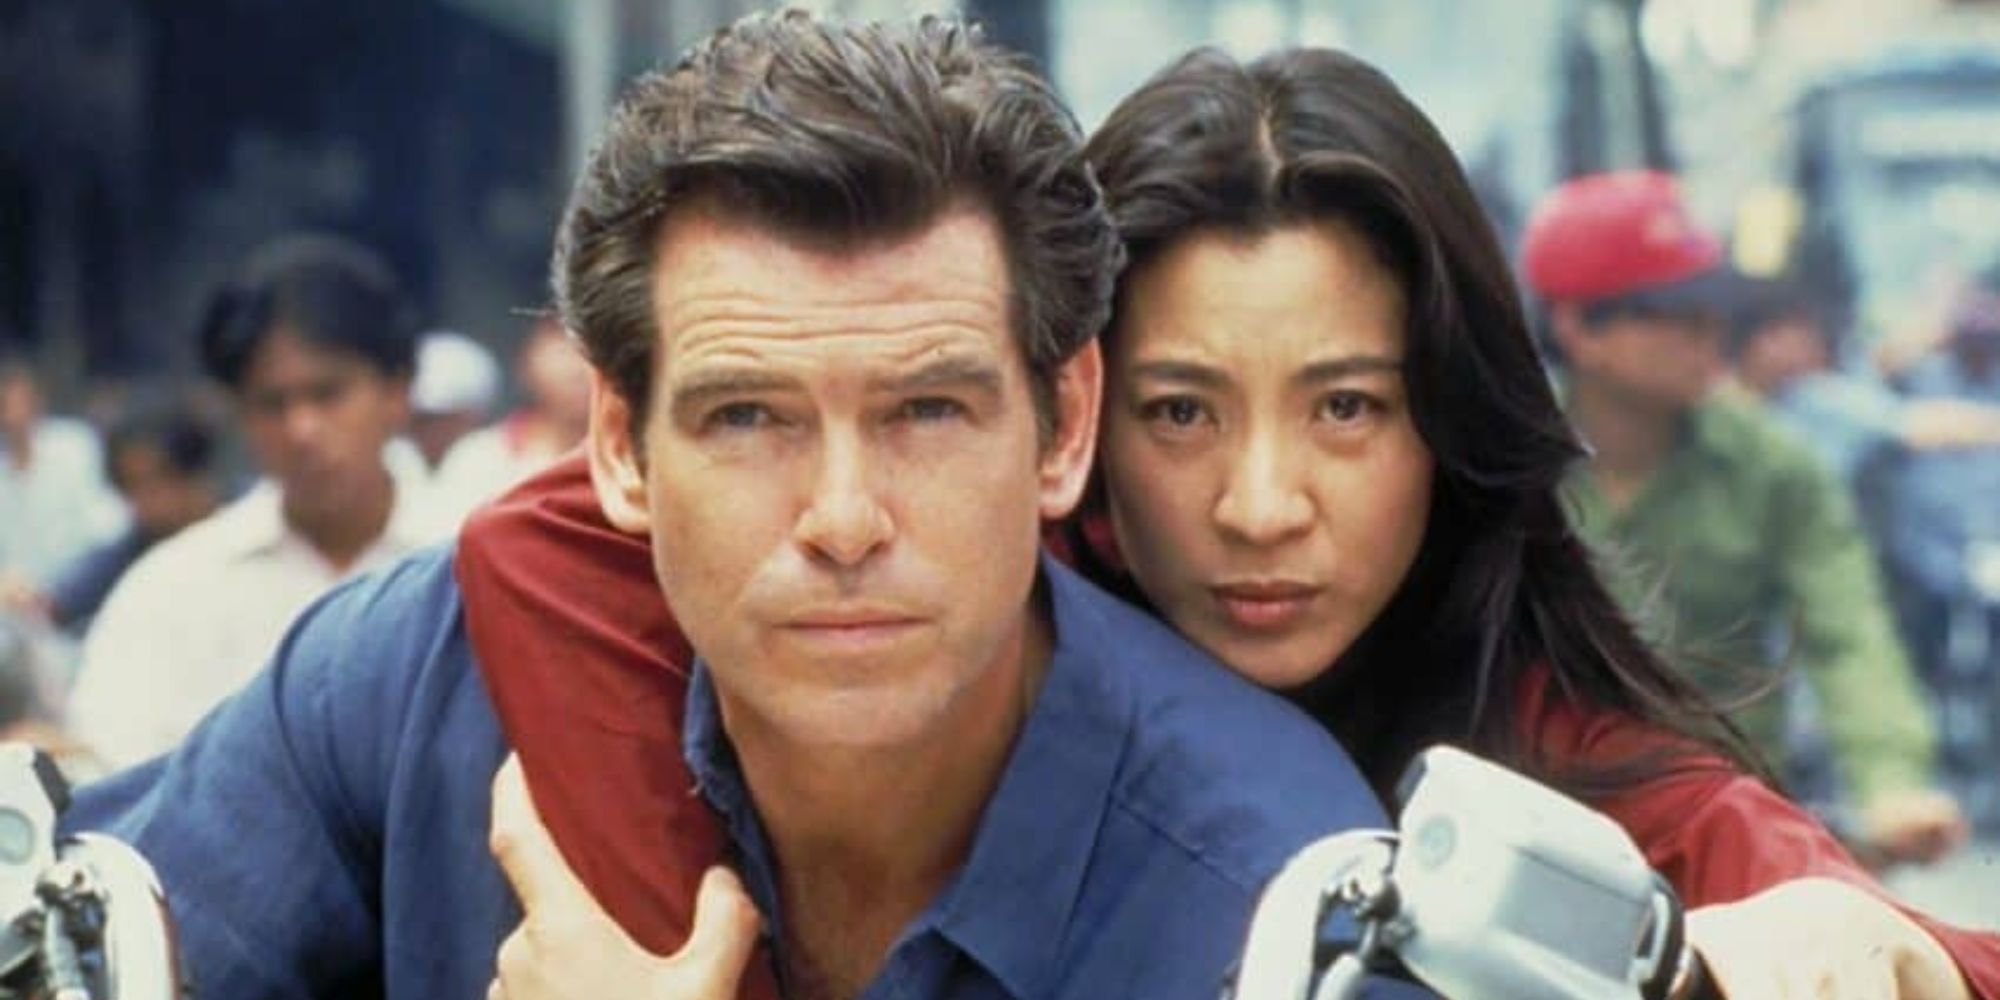 Pierce Brosnan as James Bond and Michelle Yeoh as Mai Lin on a motorbike in Tomorrow Never Dies